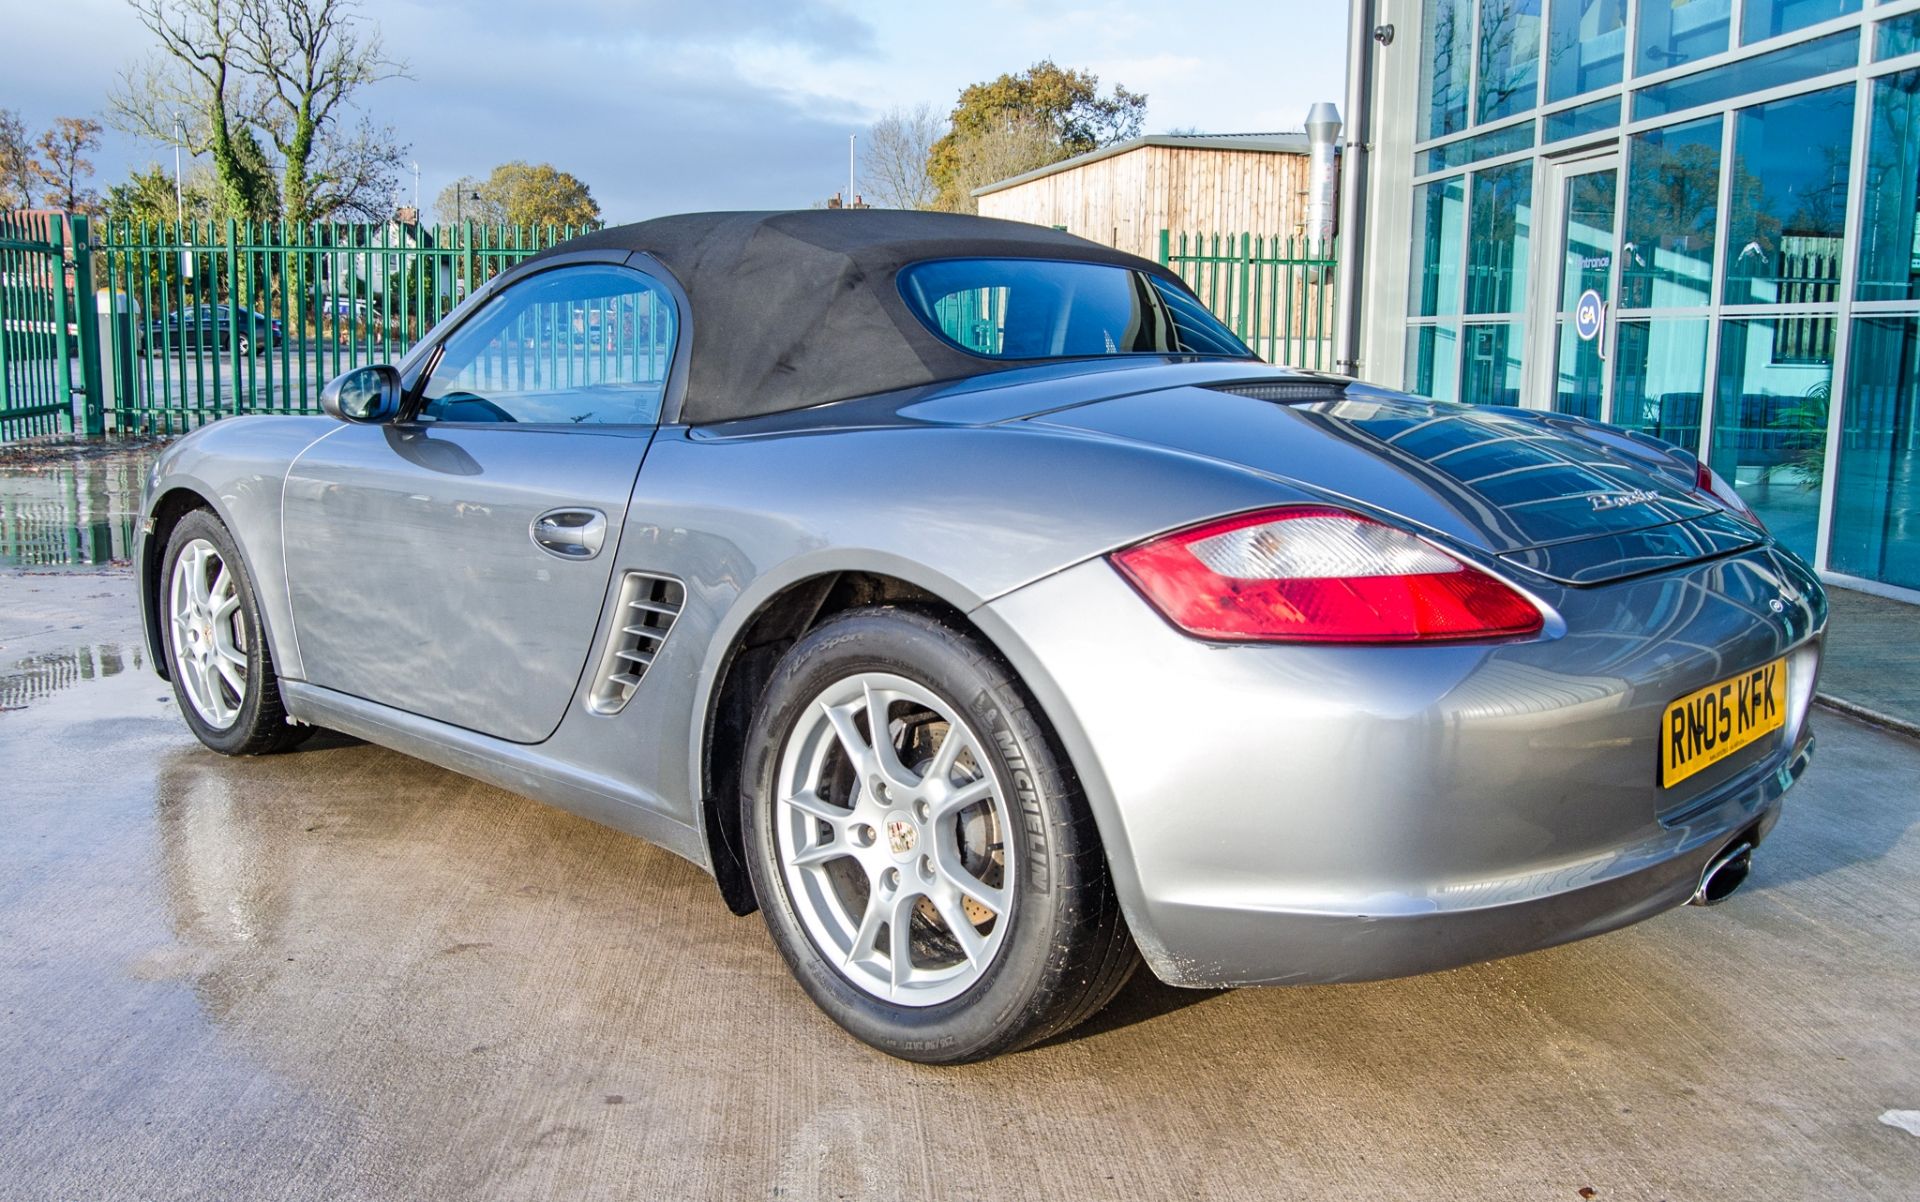 Porsche Boxster 2.7 litre 5 speed manual convertible roadster Registration Number: RN05 KFK Date - Image 4 of 45